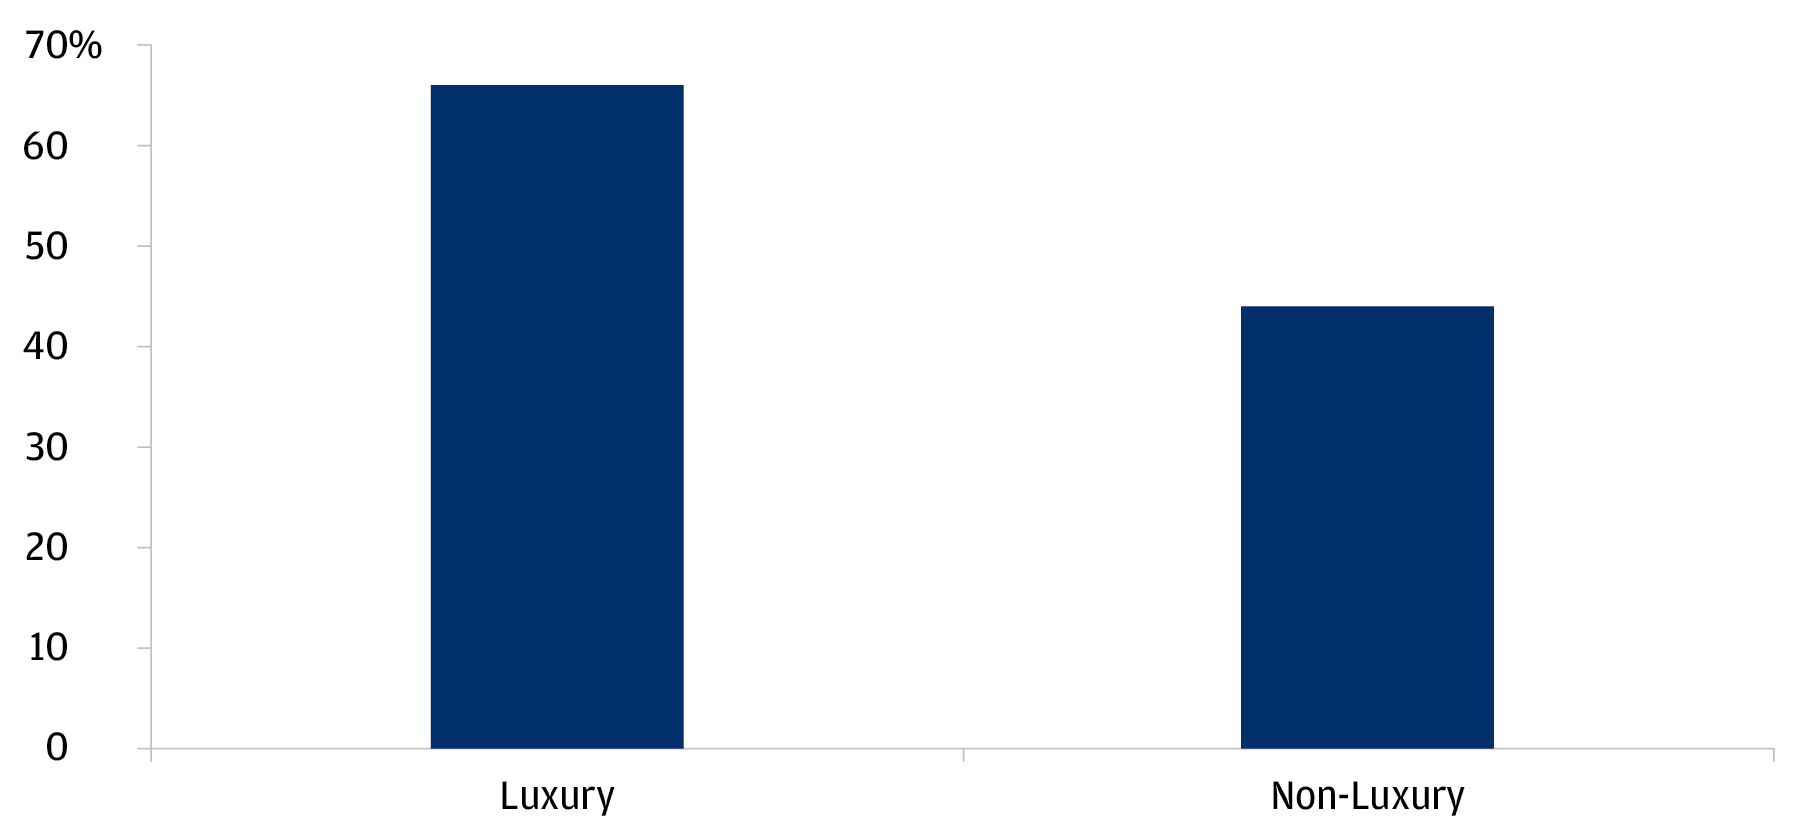 The chart describes the percentage increase in median sales price from Q4 2019 to Q4 2023 for luxury homes (top 10% of homes by sales price) and non-luxury homes (bottom 90% of homes by sales price). 